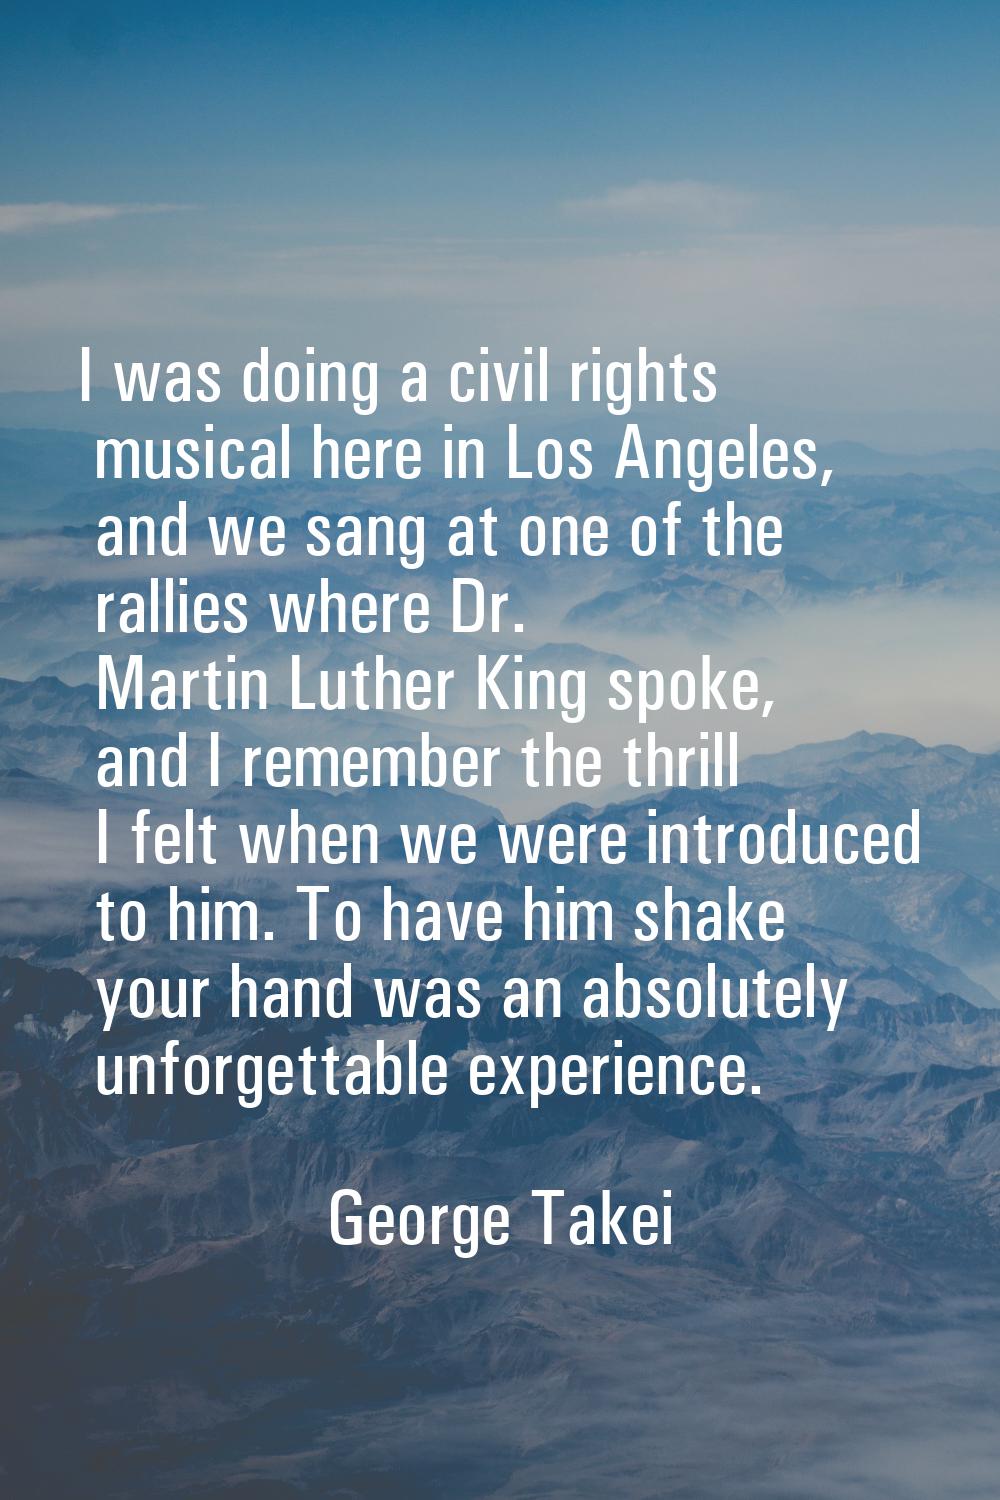 I was doing a civil rights musical here in Los Angeles, and we sang at one of the rallies where Dr.